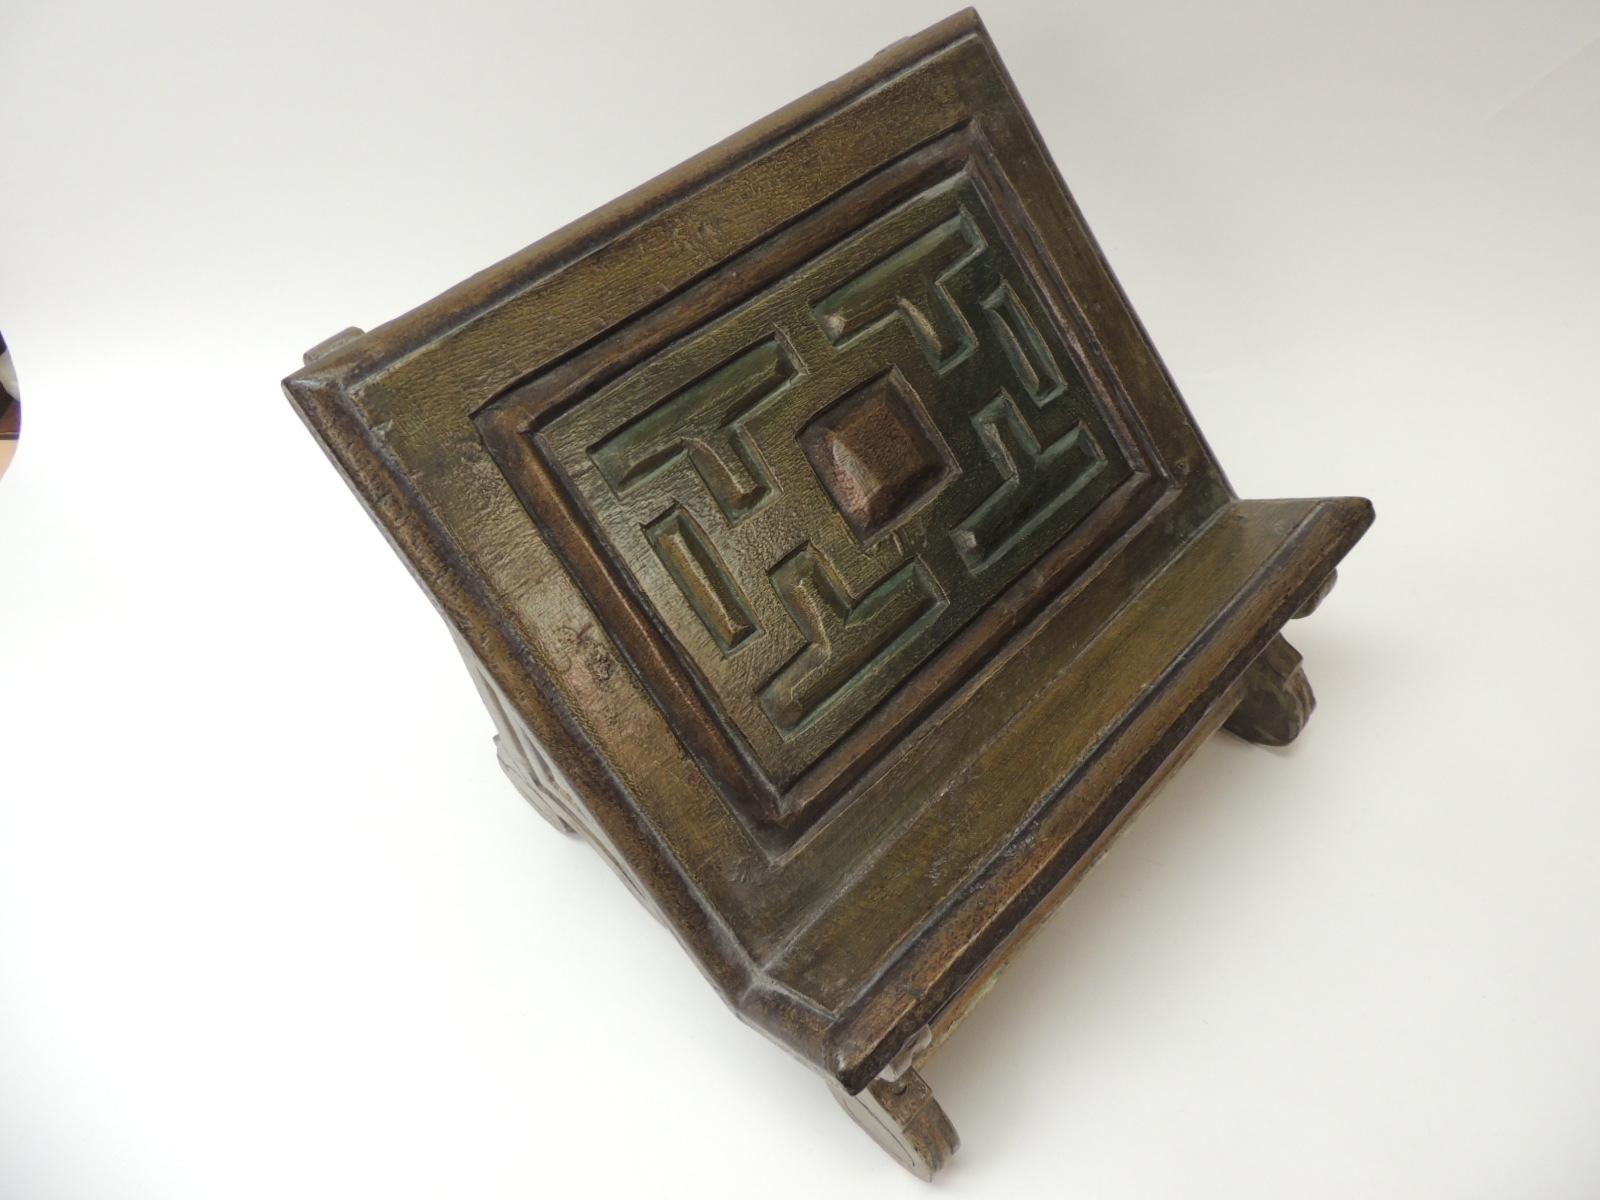 Vintage Indian hand painted and carved wood bookstand or rack.
Carved wood details with rubbed green paint around. Turned wood legs.
Size: 14 x 12 x 12.
 